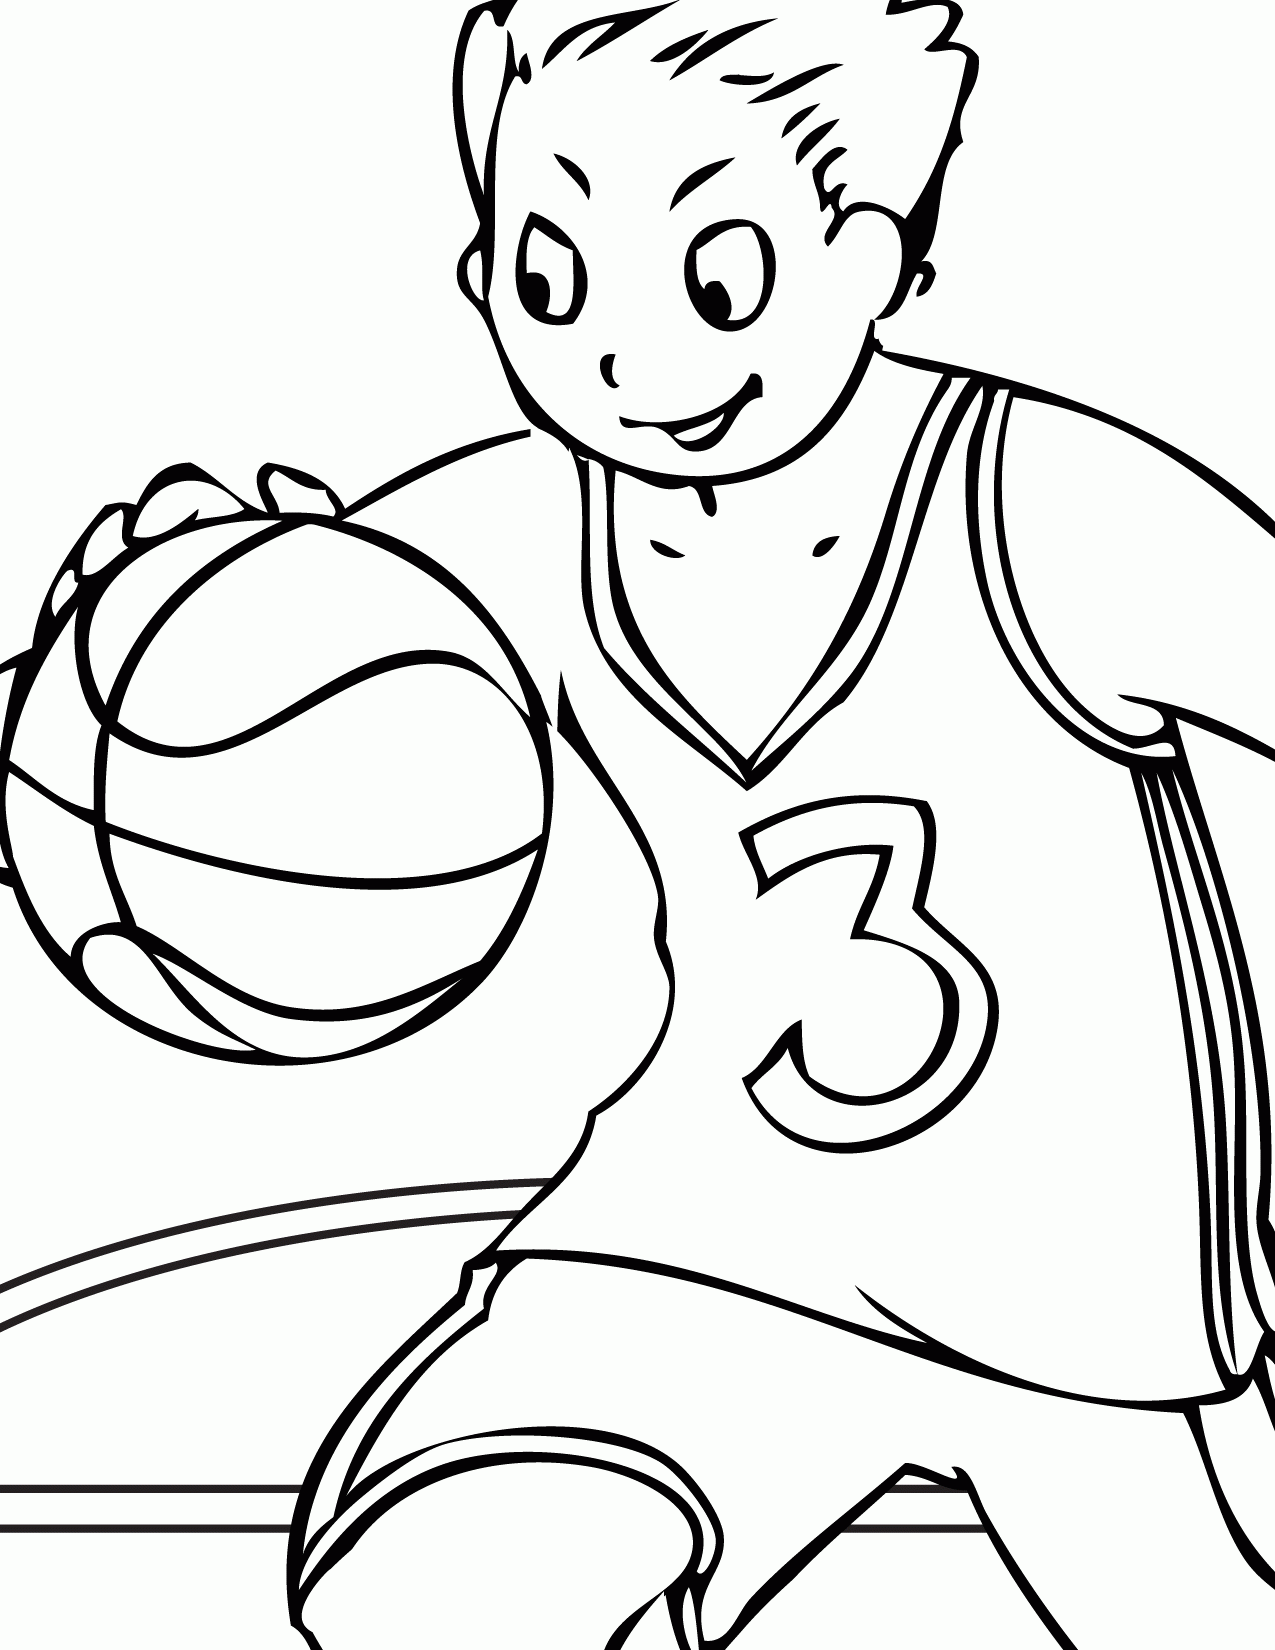 kids sports coloring pages coloring pages of kids playing sports coloring home coloring sports pages kids 